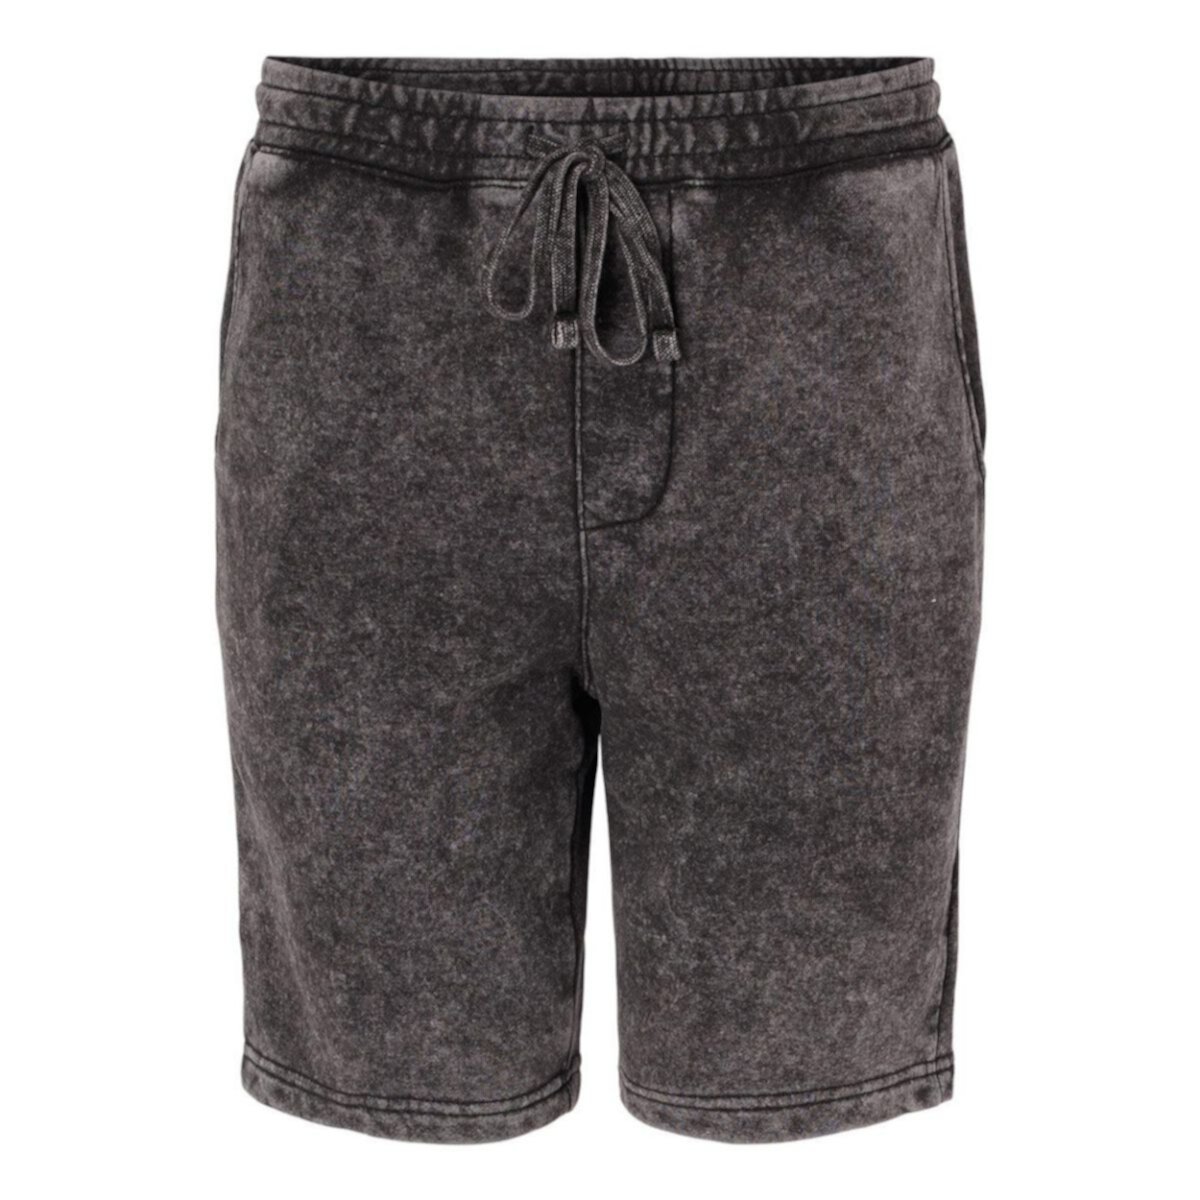 Mineral Wash Fleece Shorts Independent Trading Co.